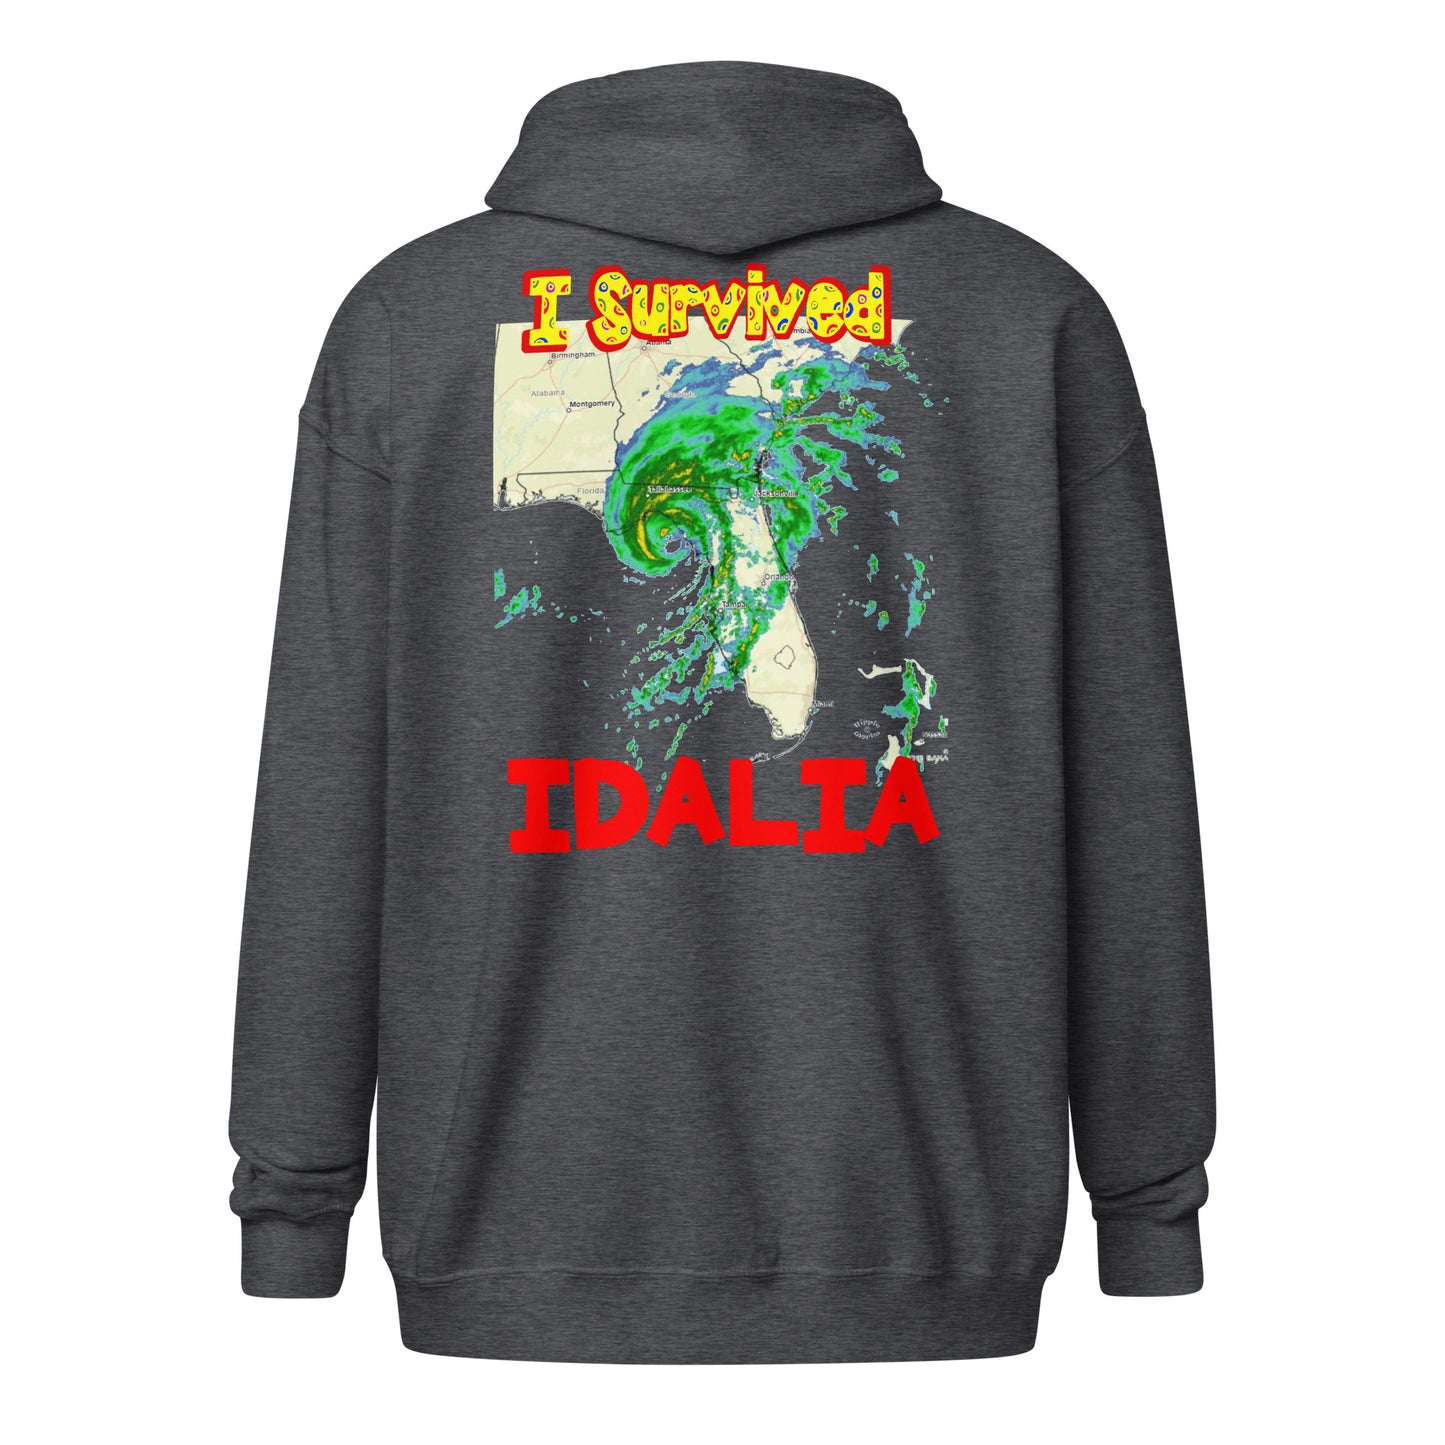 A cut out picture of a hoodie with back print design of I SURVIVED Hurricane IDALIA Unisex Heavy Blend Zip Hoodie in dark heather grey